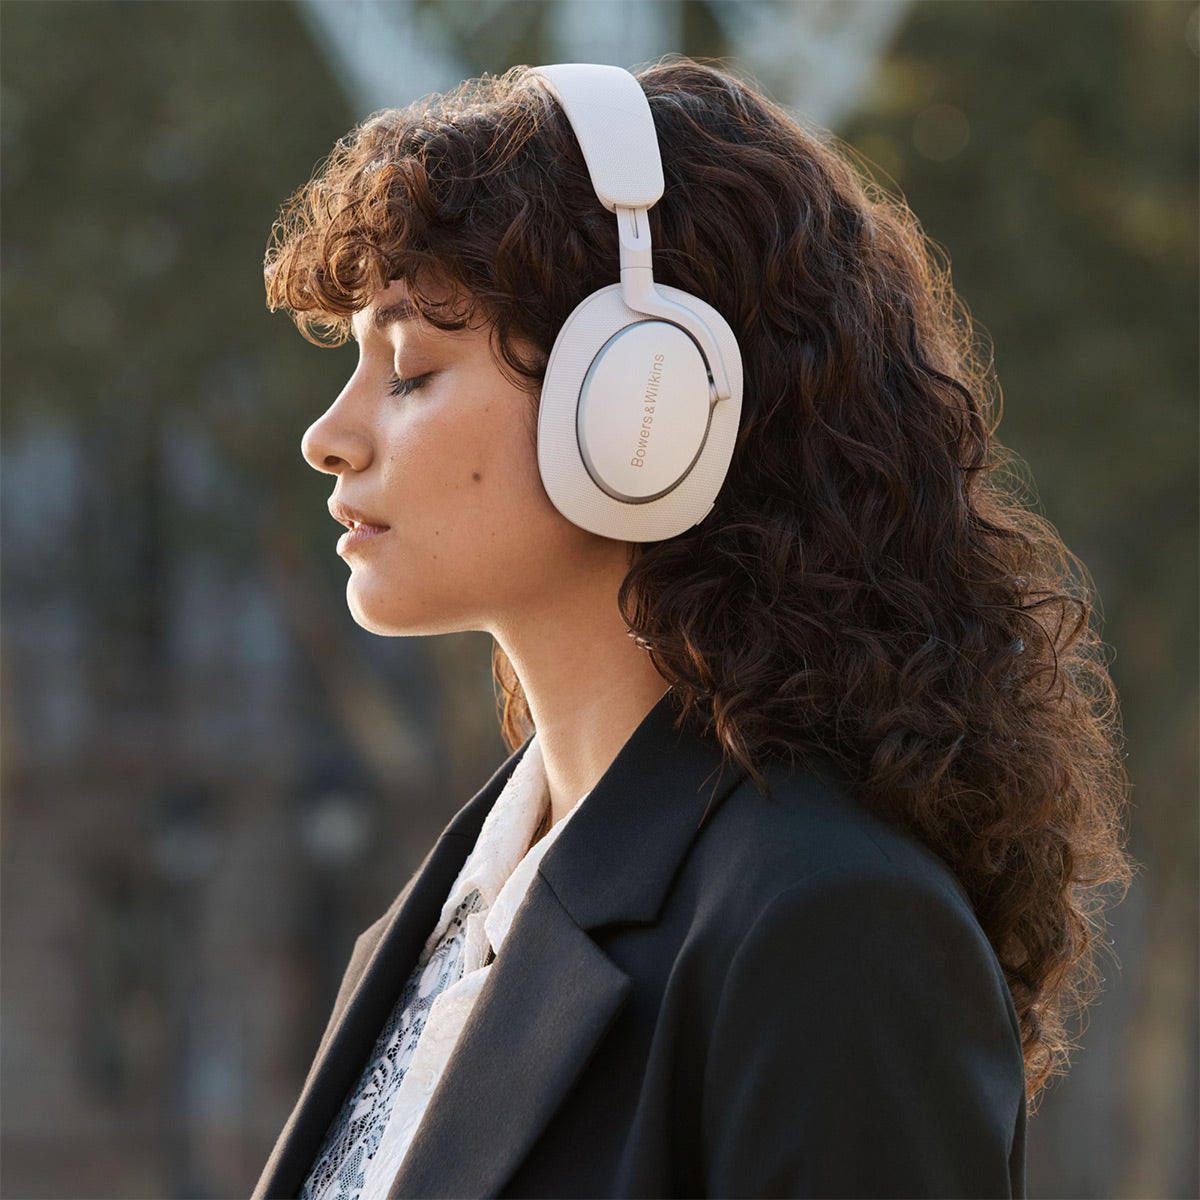 Bowers & Wilkins Px7 S2e Wireless Noise Canceling Bluetooth 